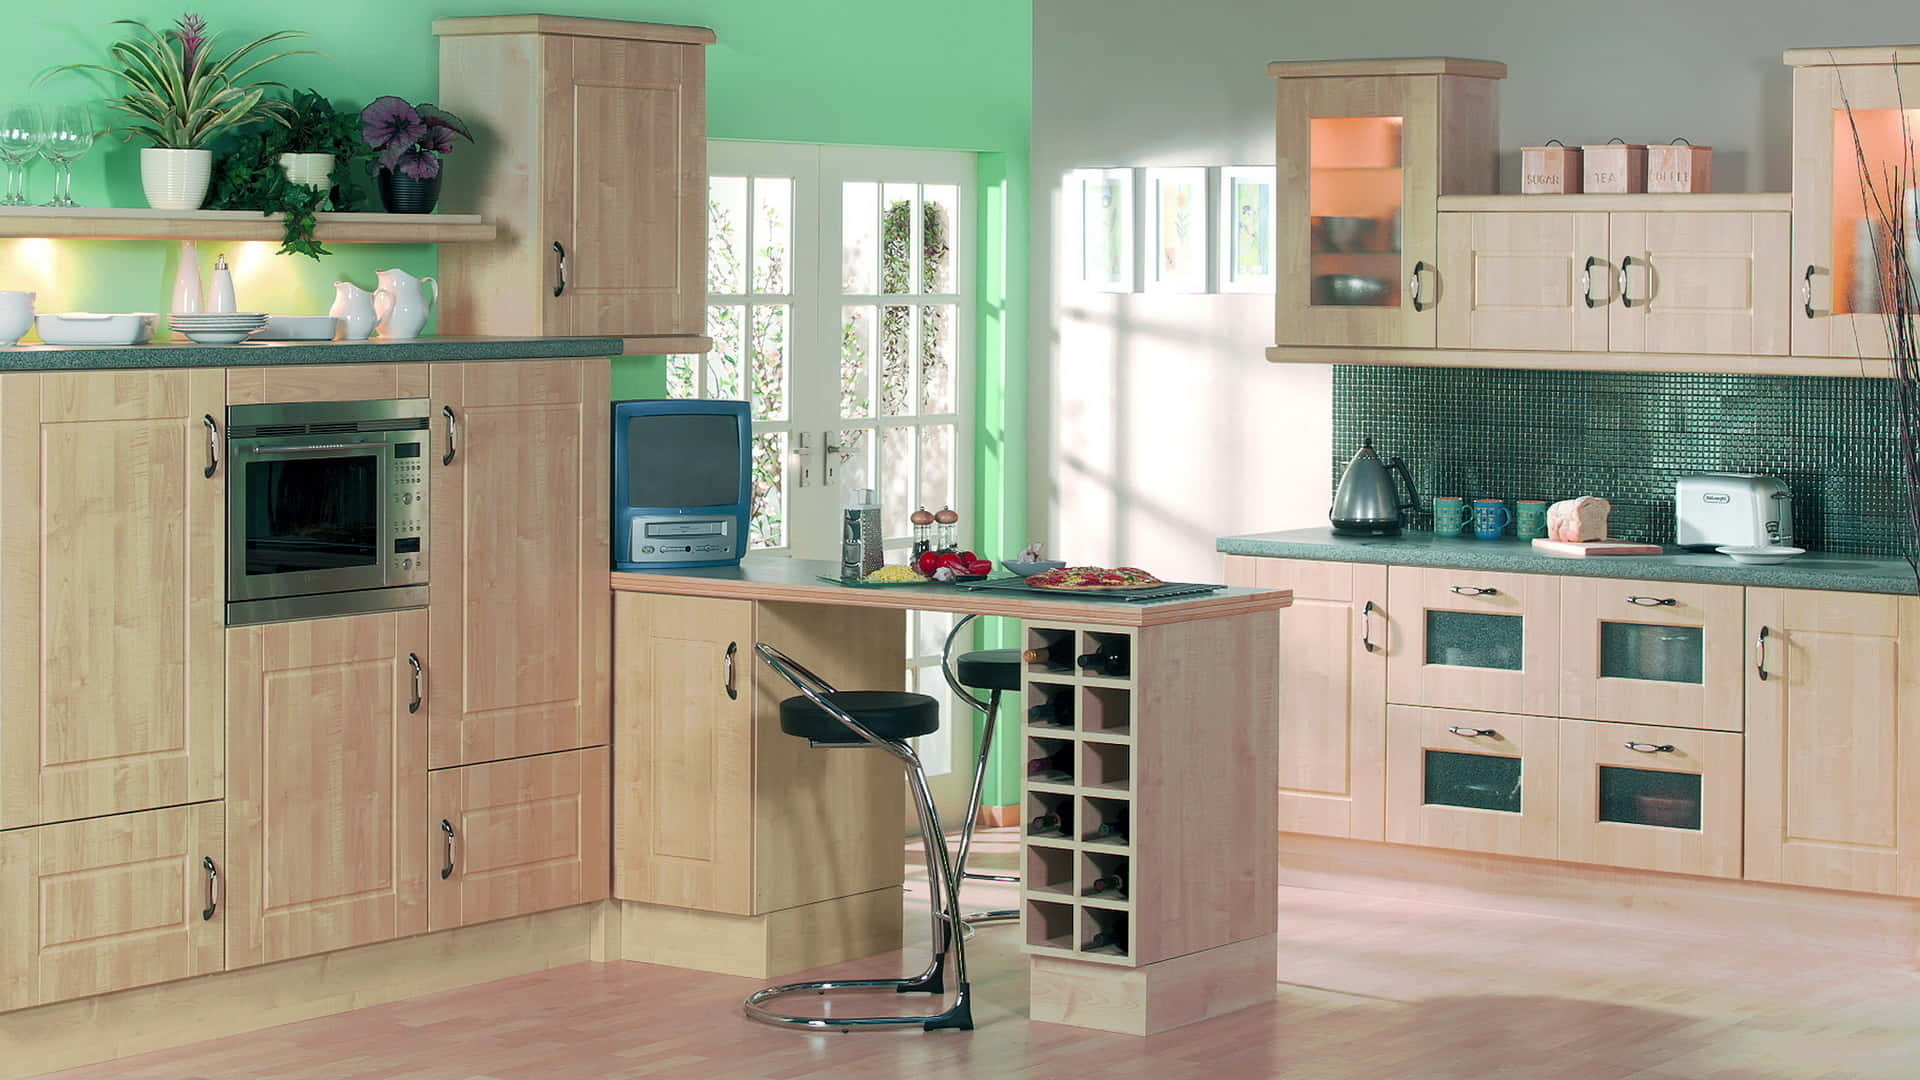 Cabinets With Green Countertop 1920x1080 Kitchen Background